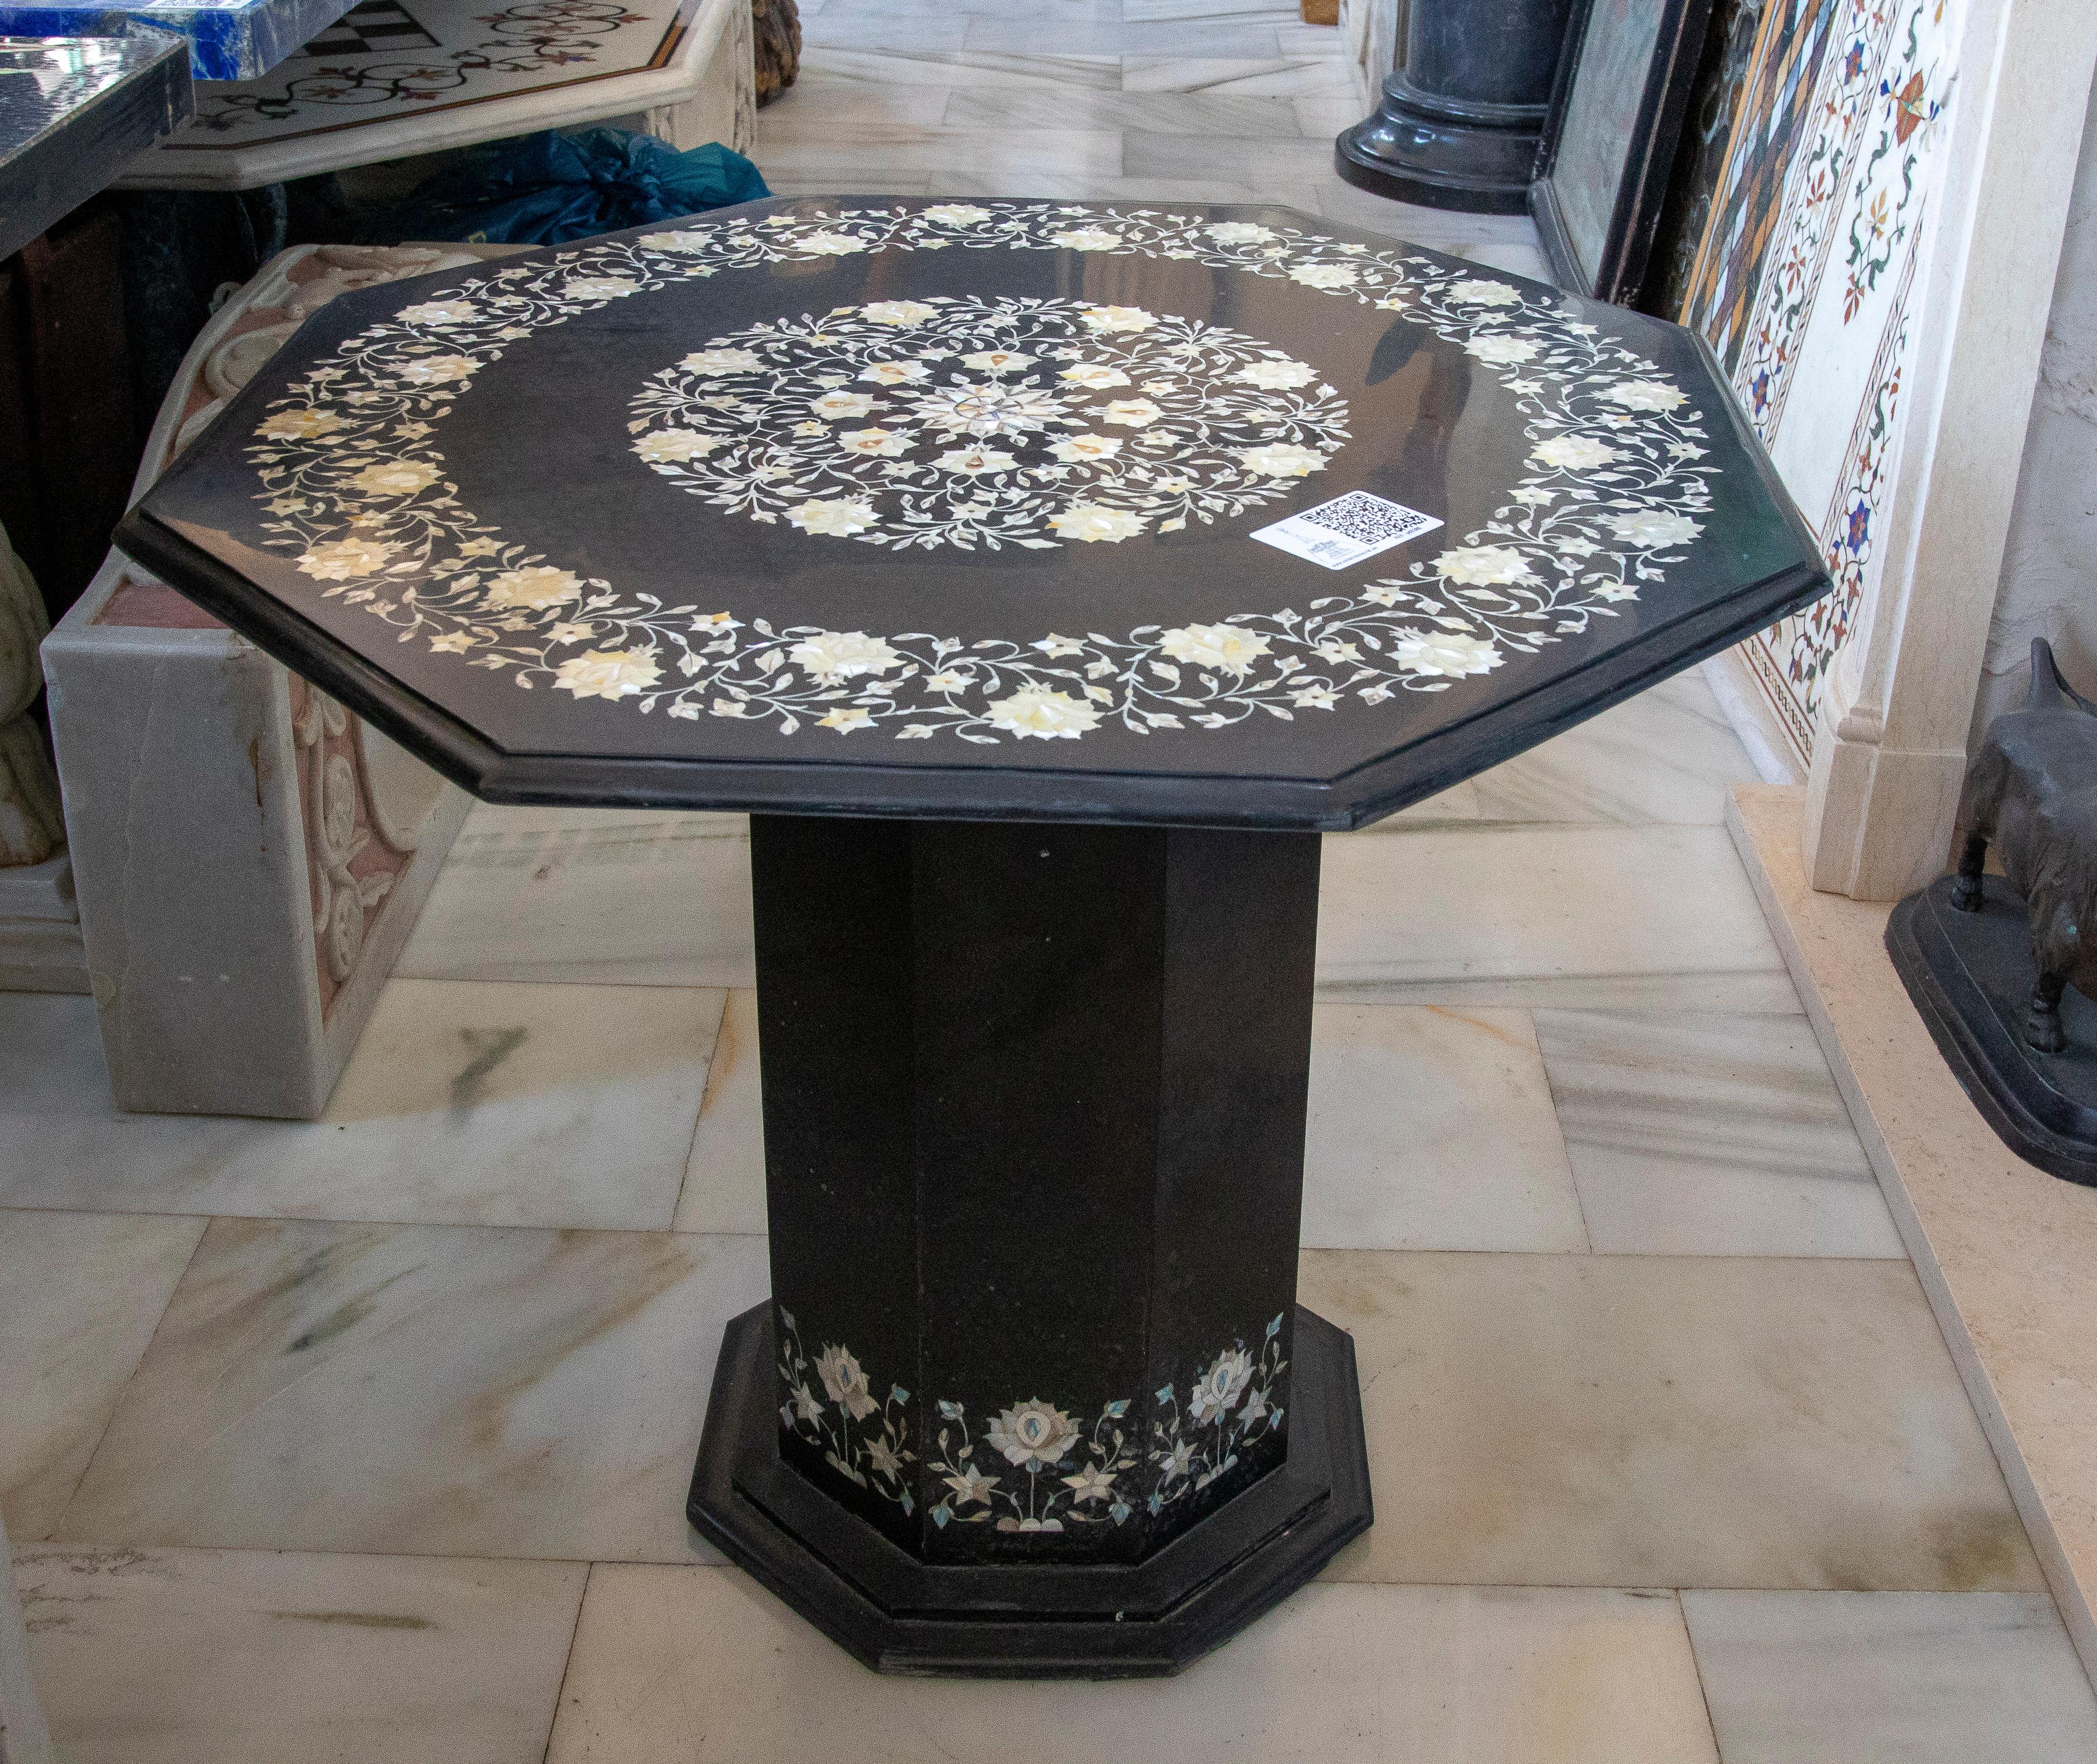 1990s Spanish mother of pearl Pietra Dura inlay mosaic octagonal side table with pedestal.